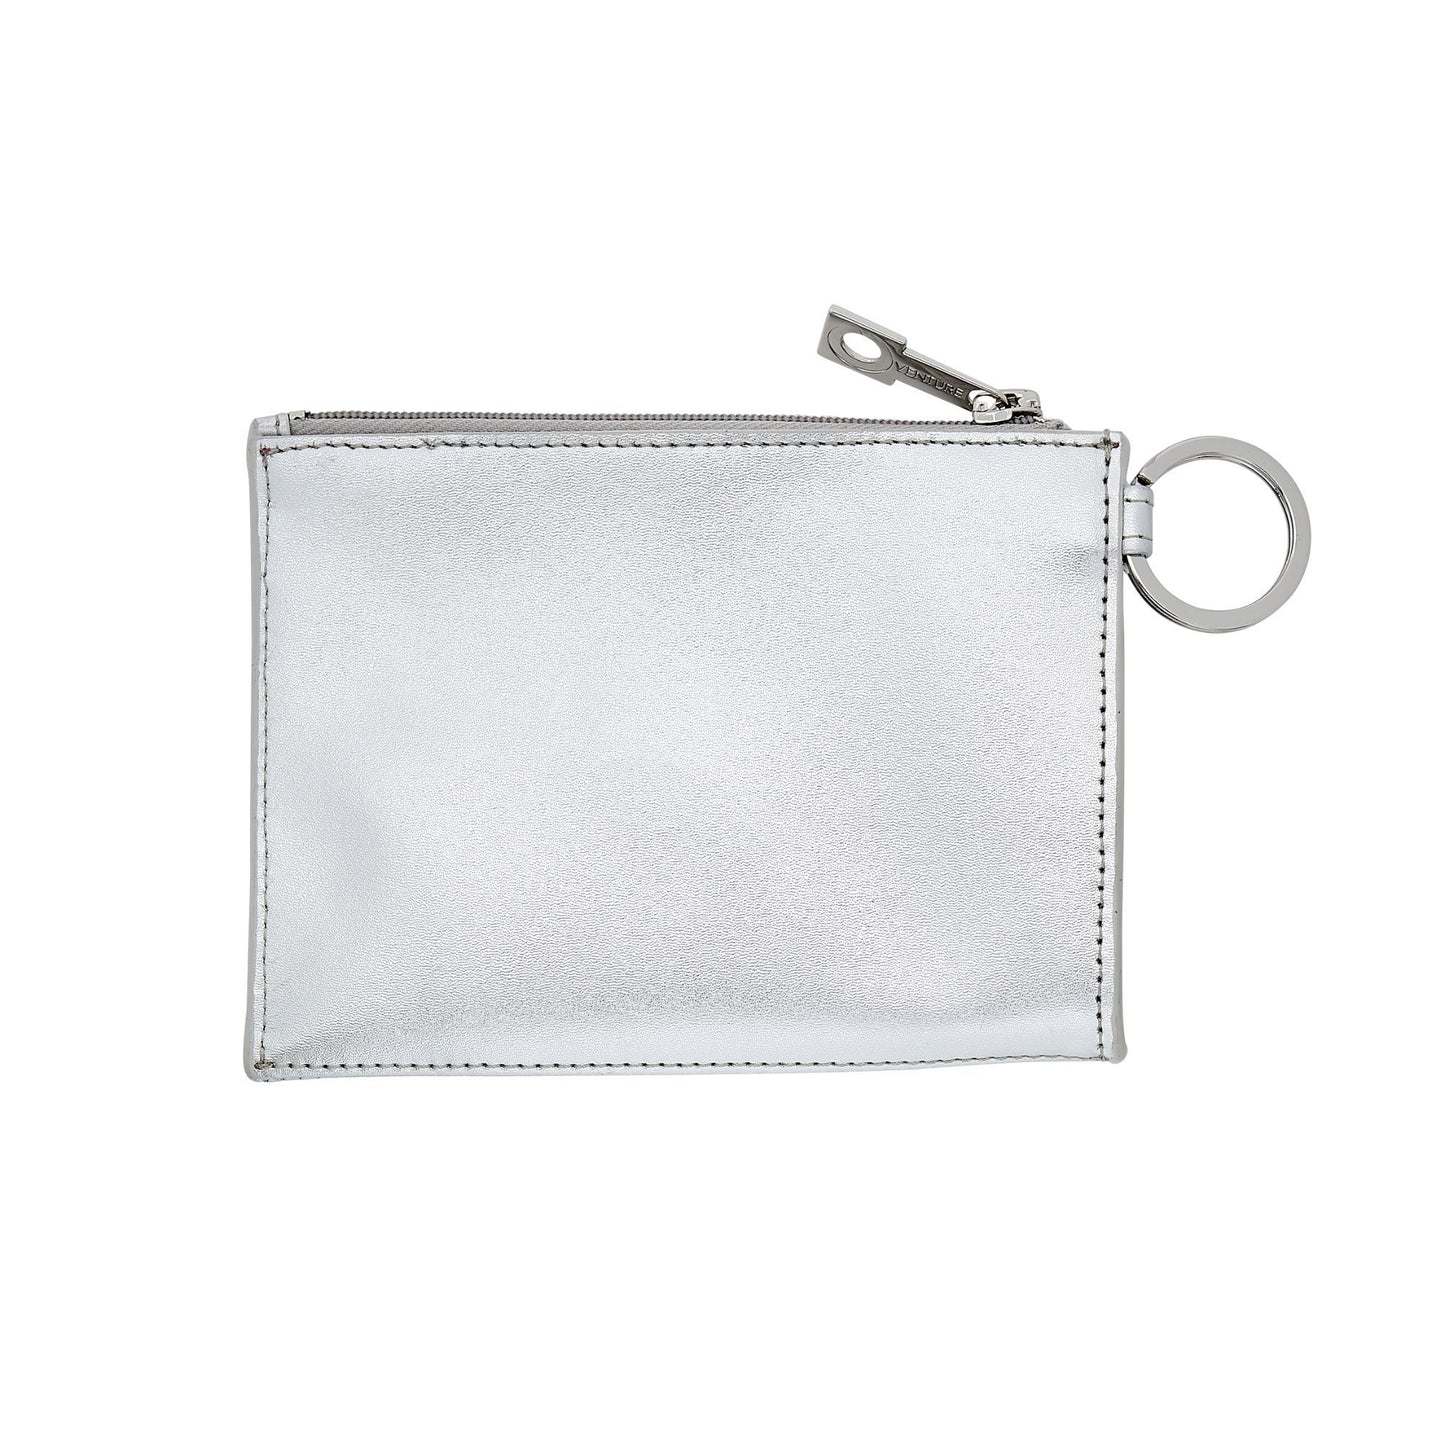 Quicksilver - Ossential Leather Card Case in silver. Large enough for multiple cards, cash, lipstick